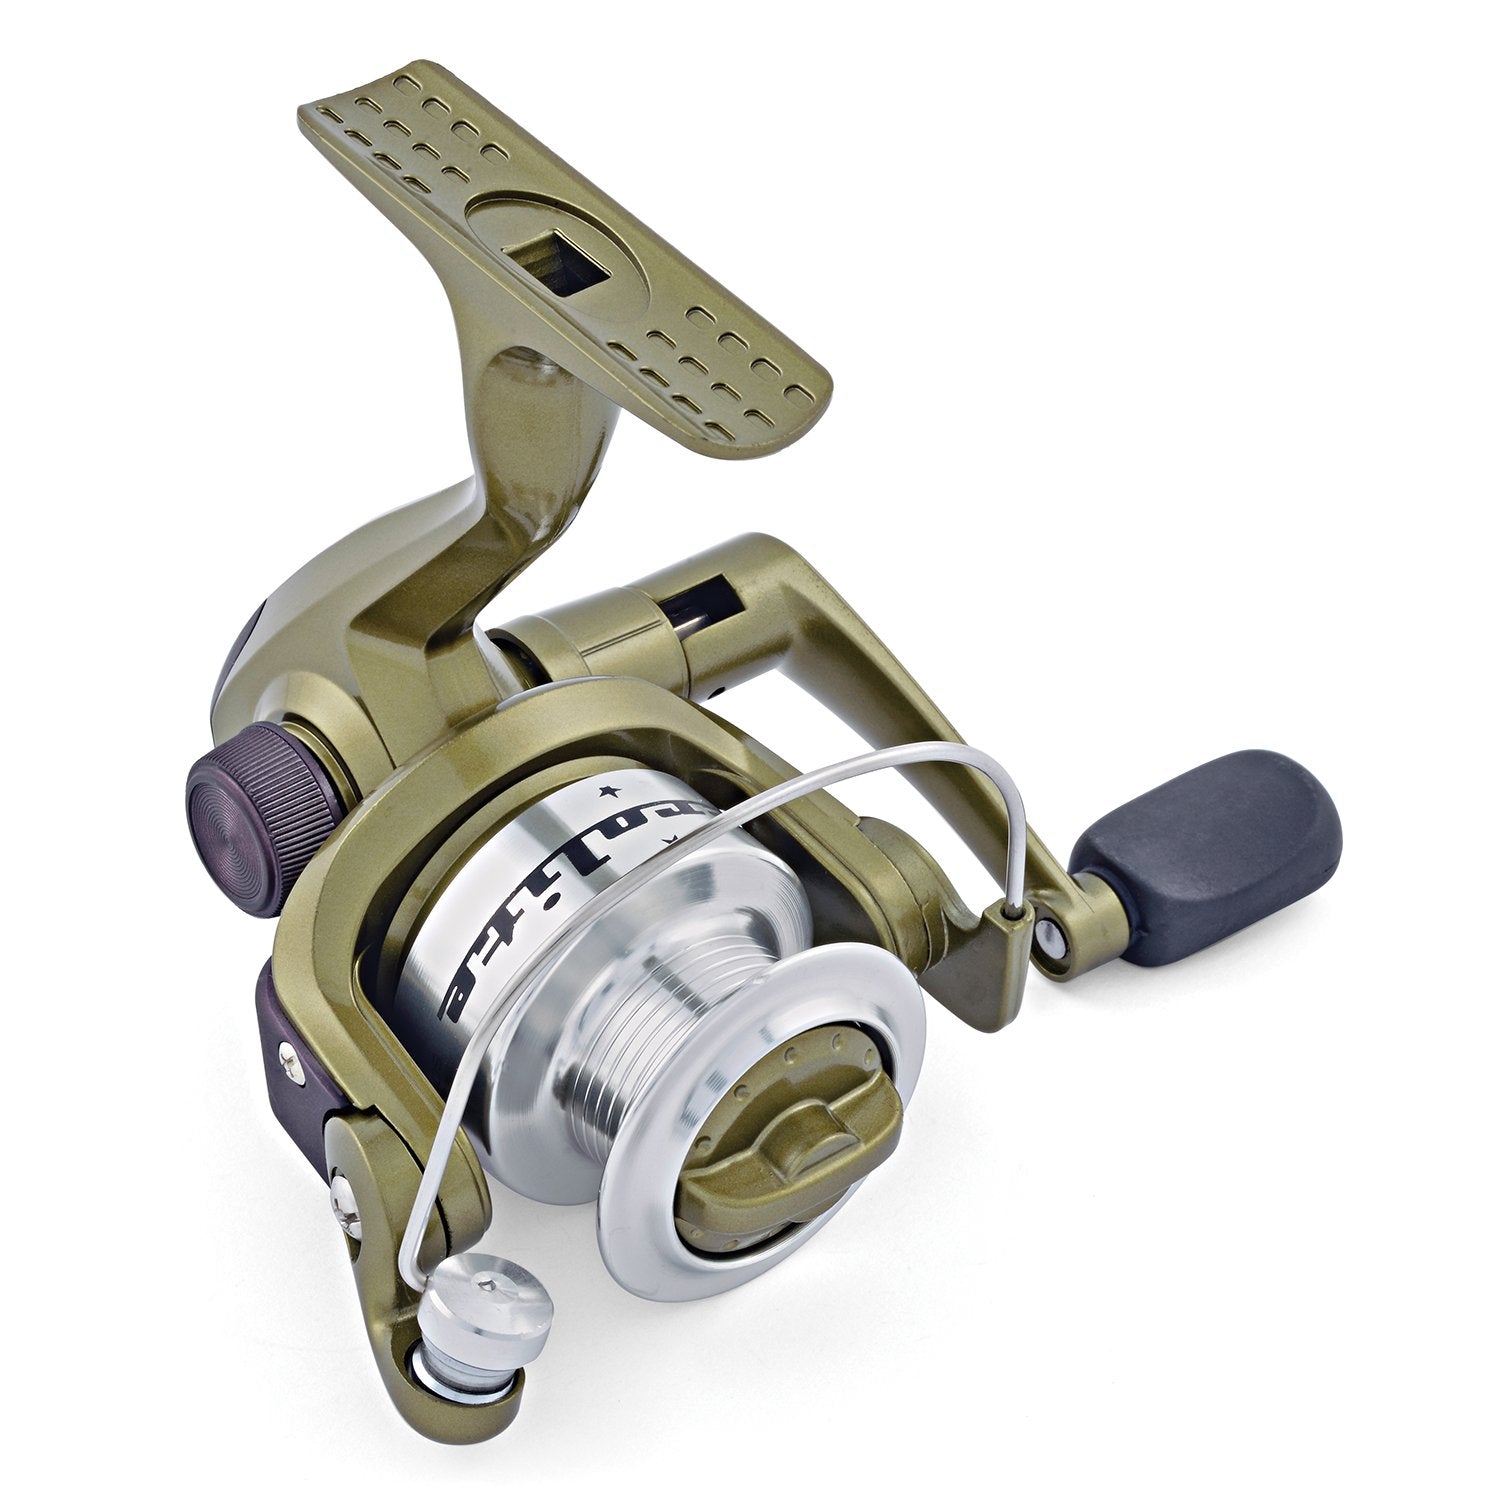 South Bends - Fishing Reels